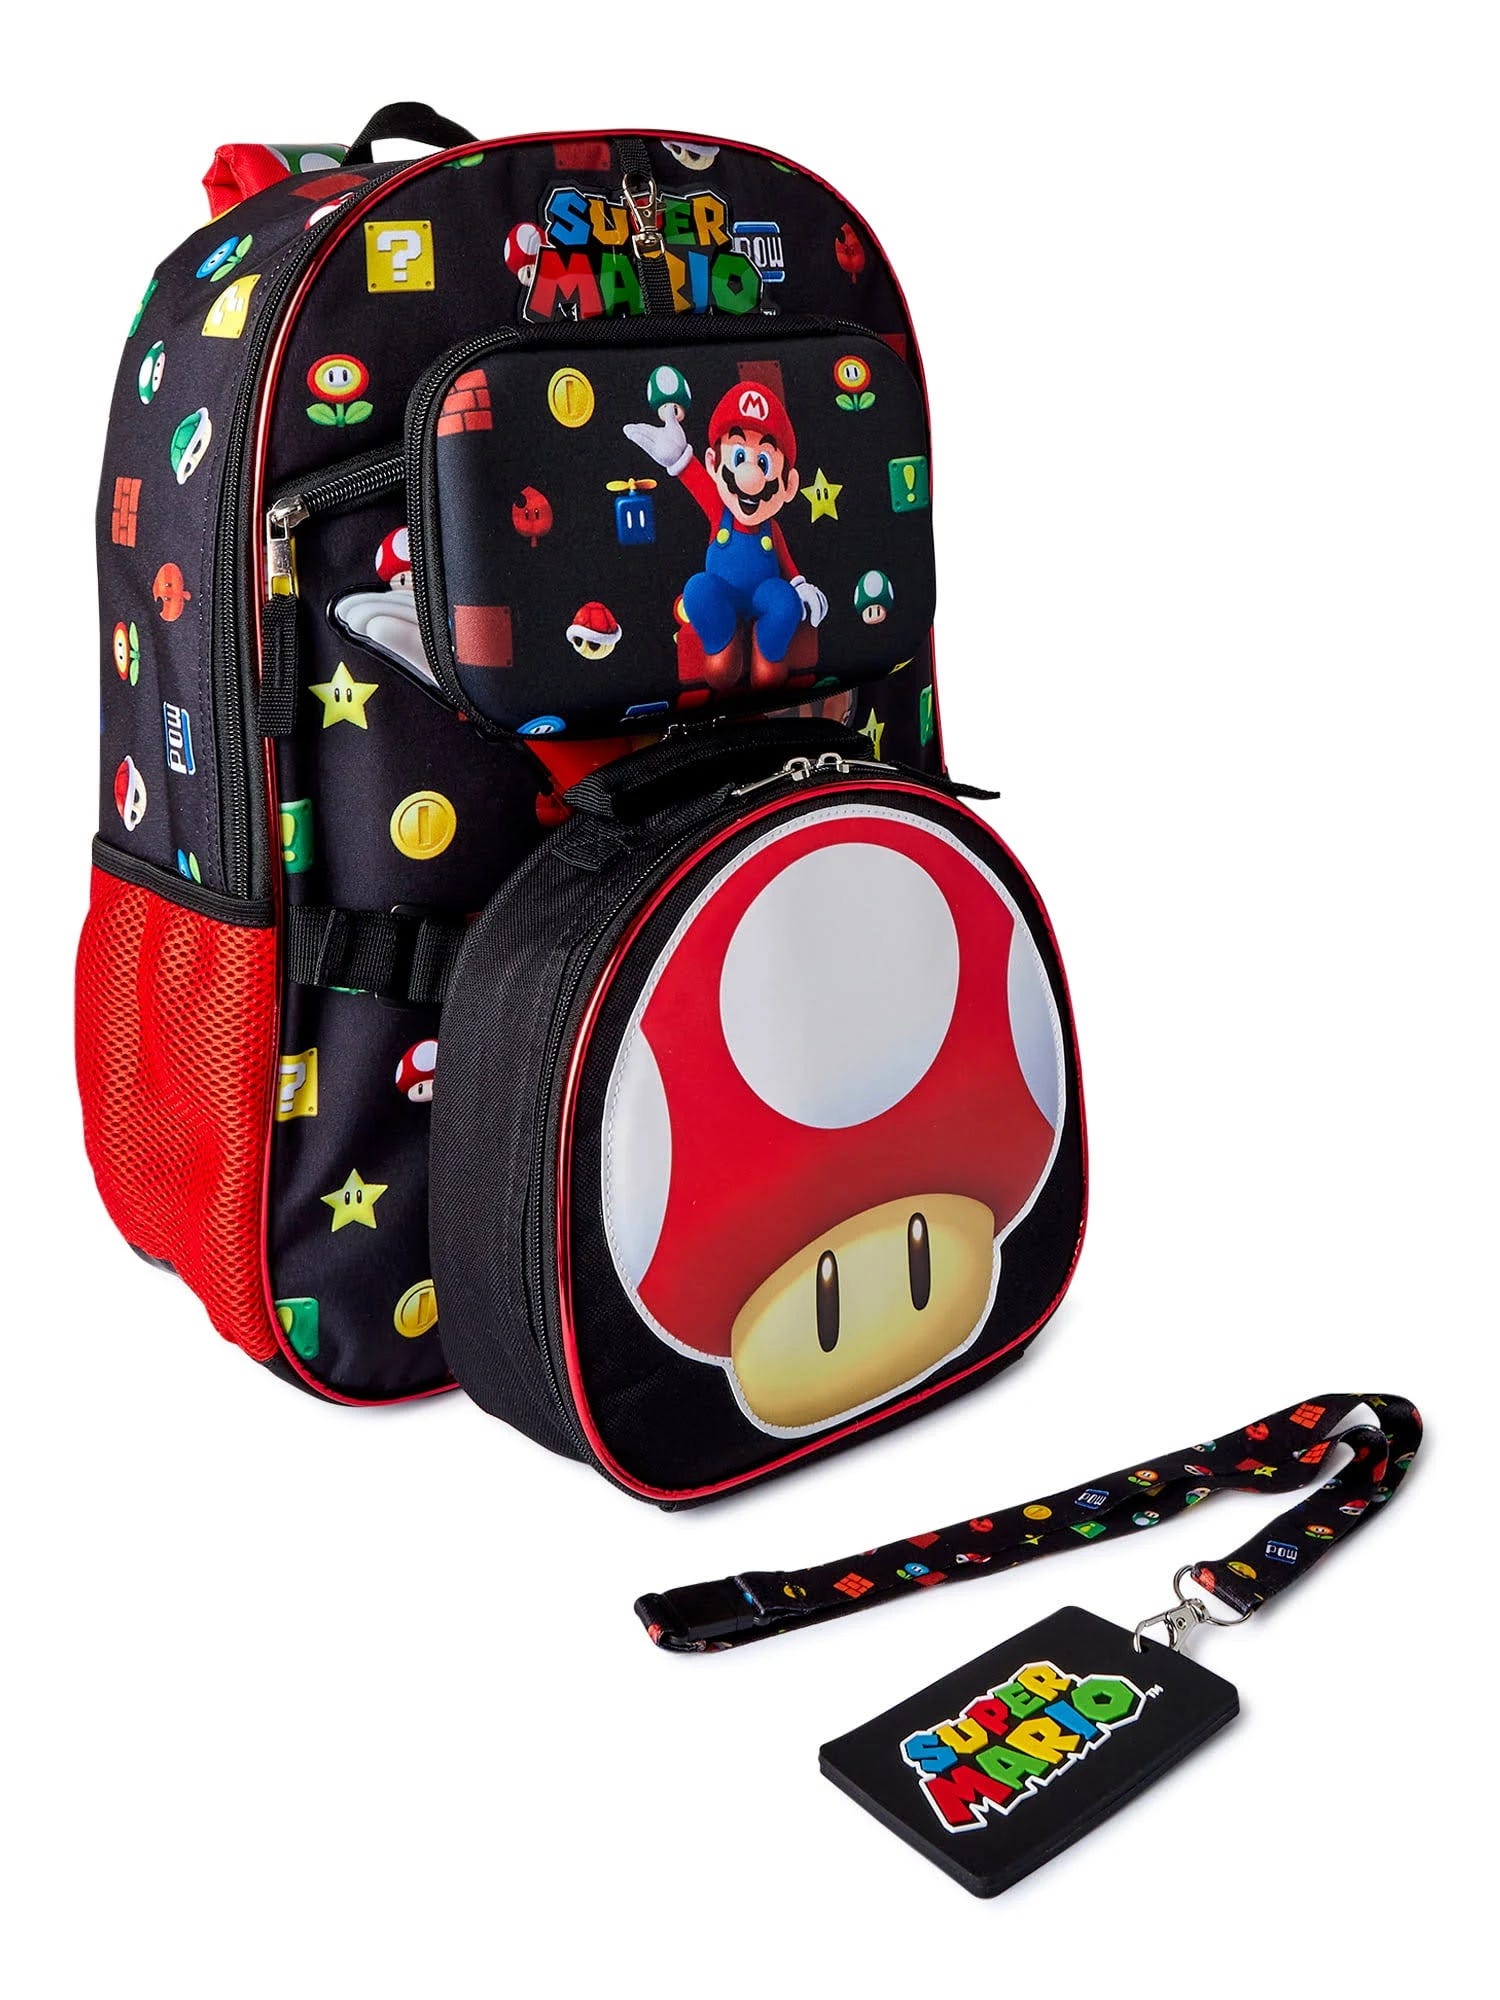 Super Mario Fun Backpack Set with Lunch Bag for Kids | Image